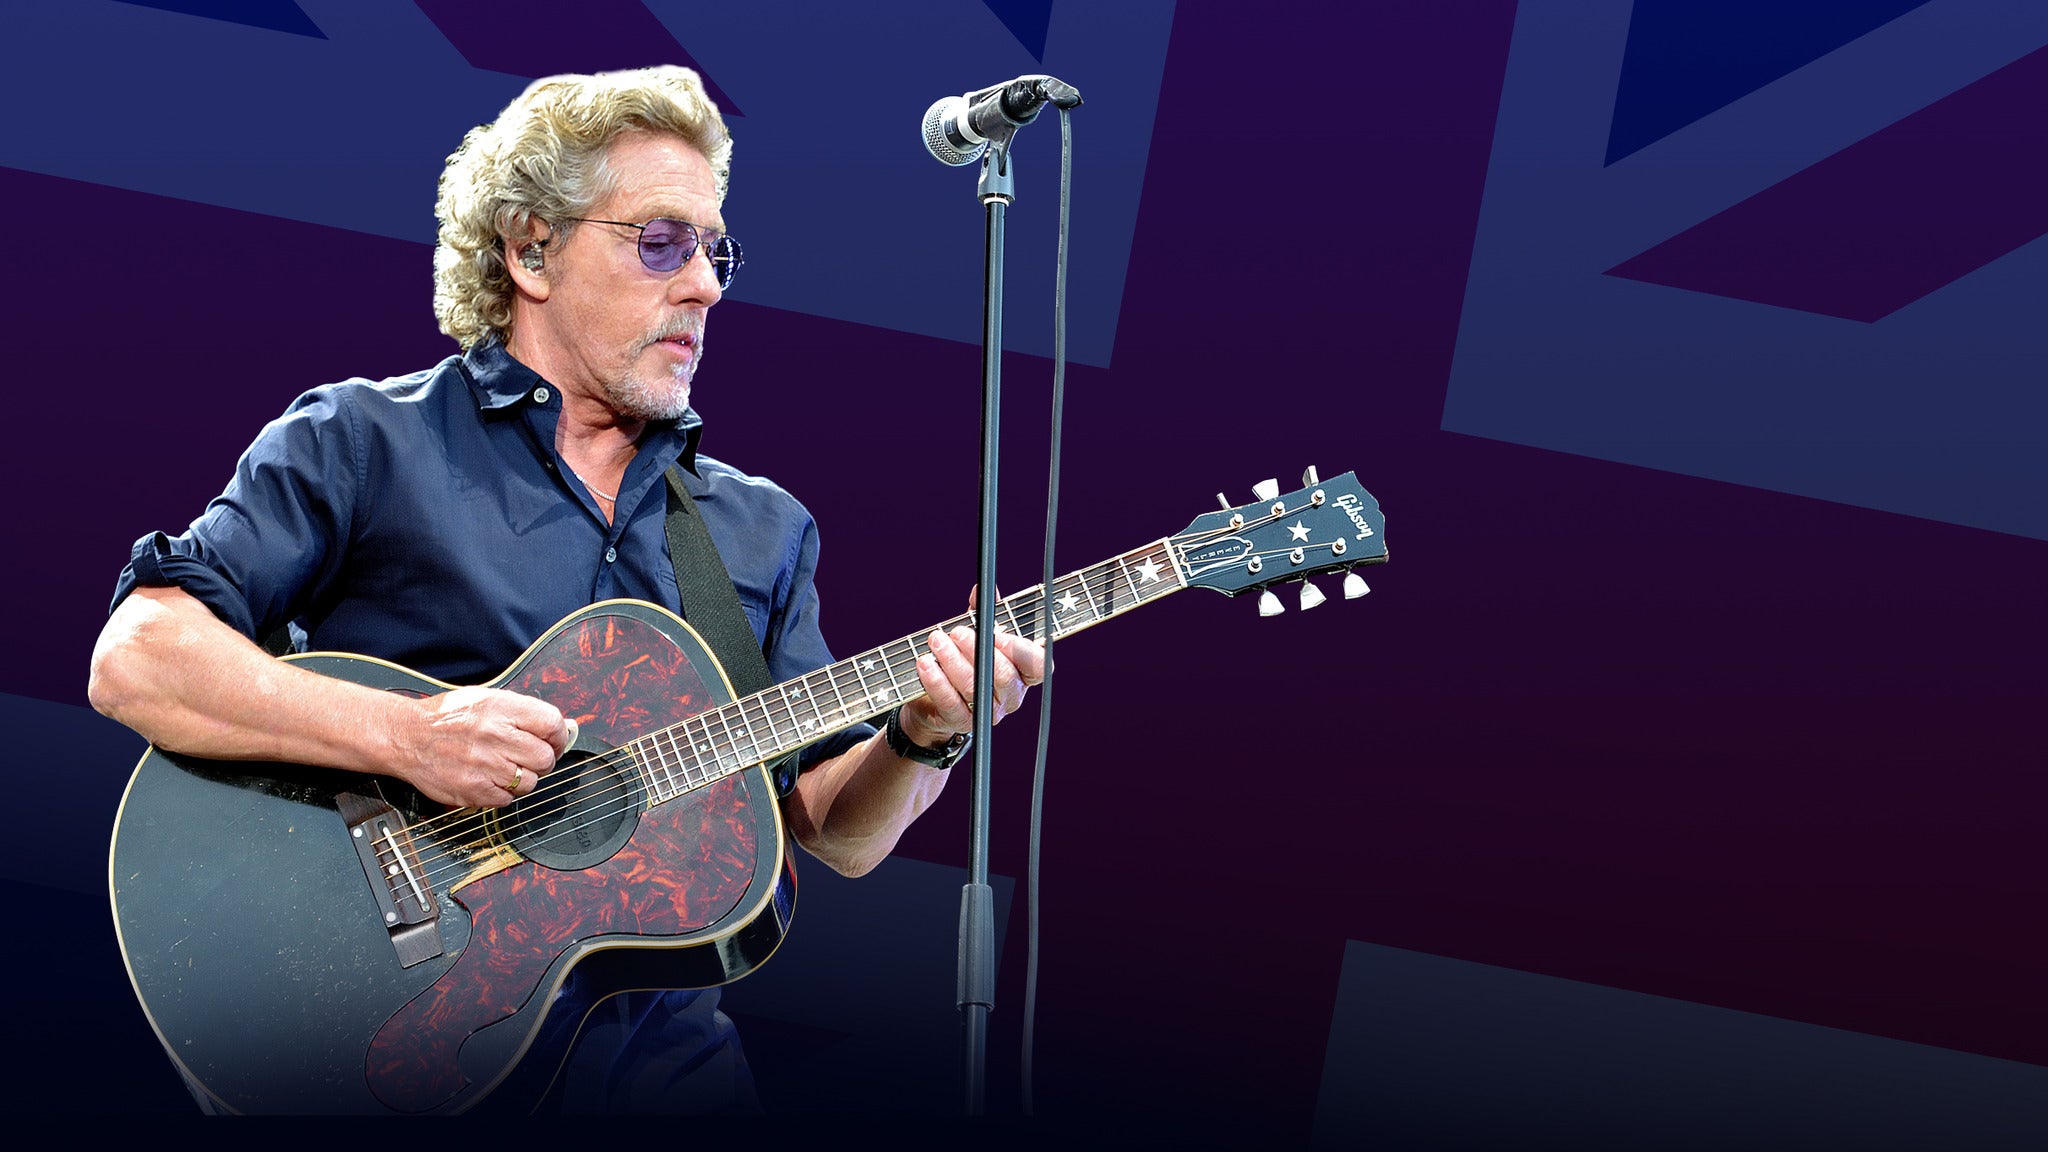 Roger Daltrey - Hits and Rarities of The Who and Roger Daltrey in Costa Mesa promo photo for Twitter Follower presale offer code